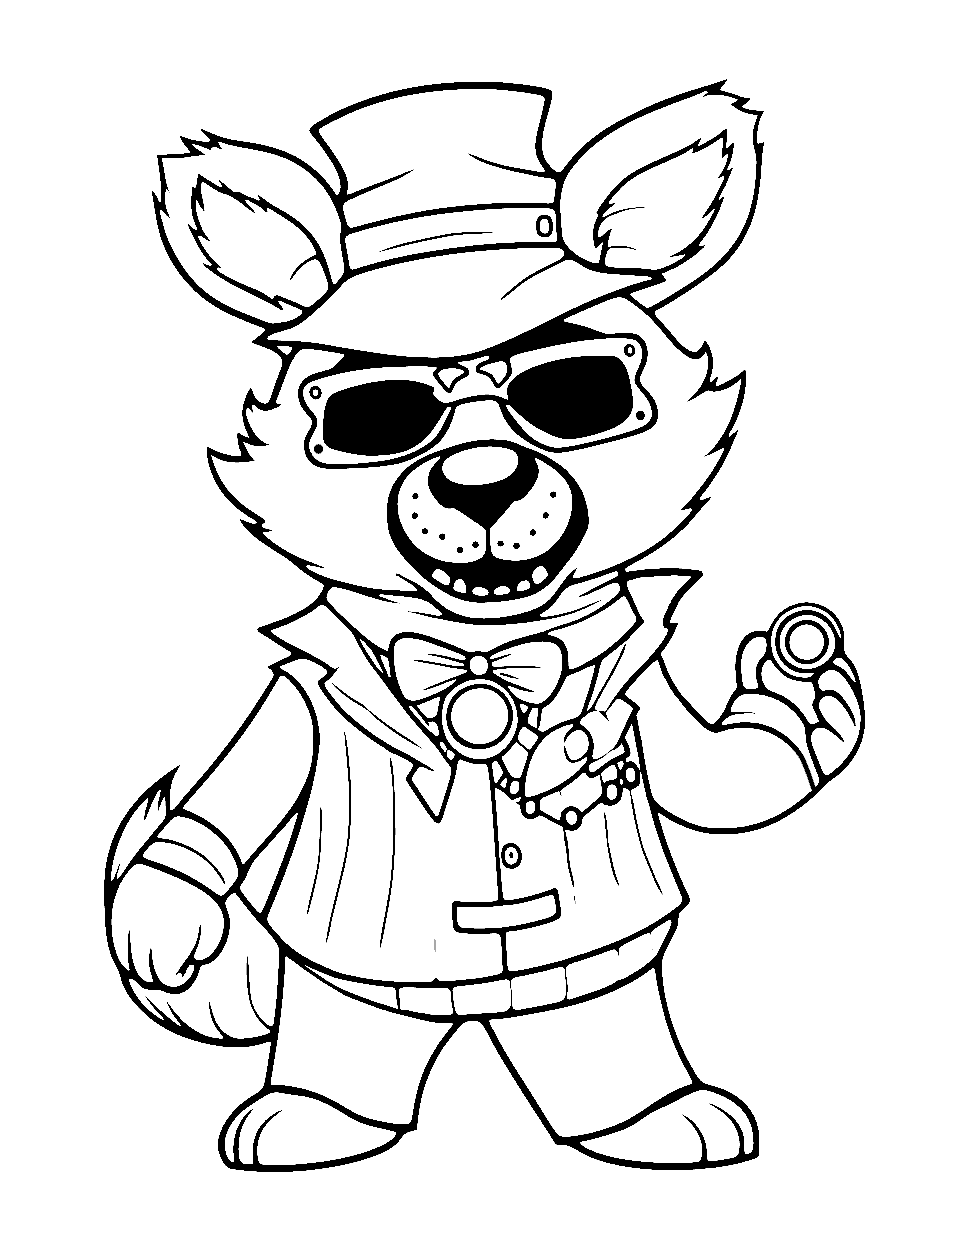 Cool Foxy Five Nights at Freddys Coloring Page - Foxy wearing sunglasses and a hat.